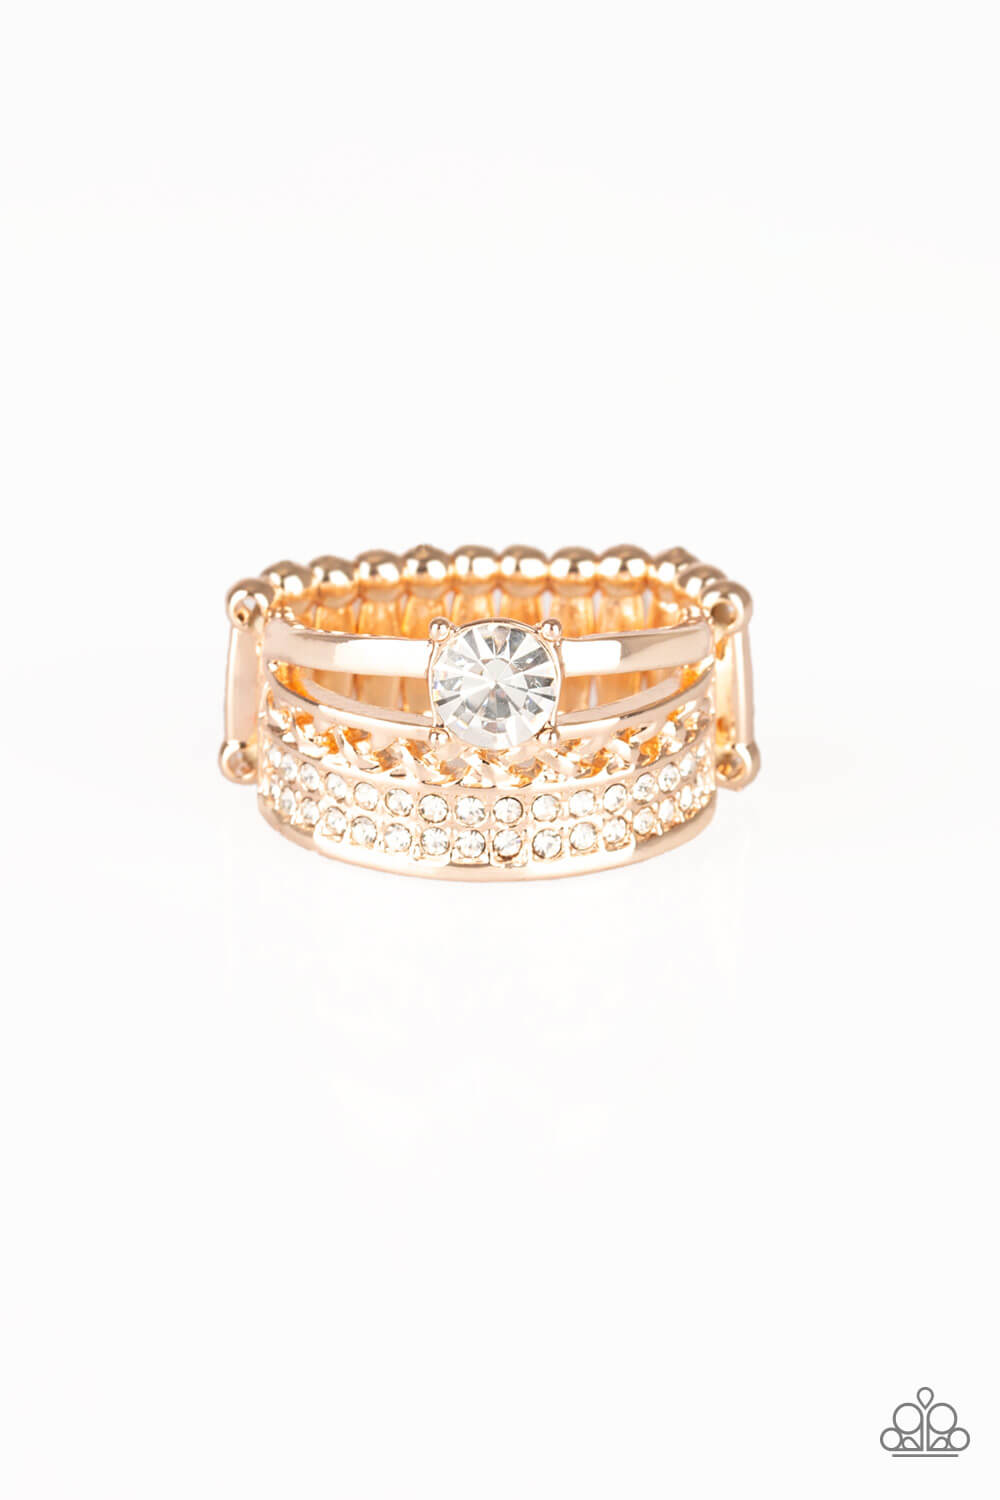 The Overachiever Rose Gold Ring - Princess Glam Shop